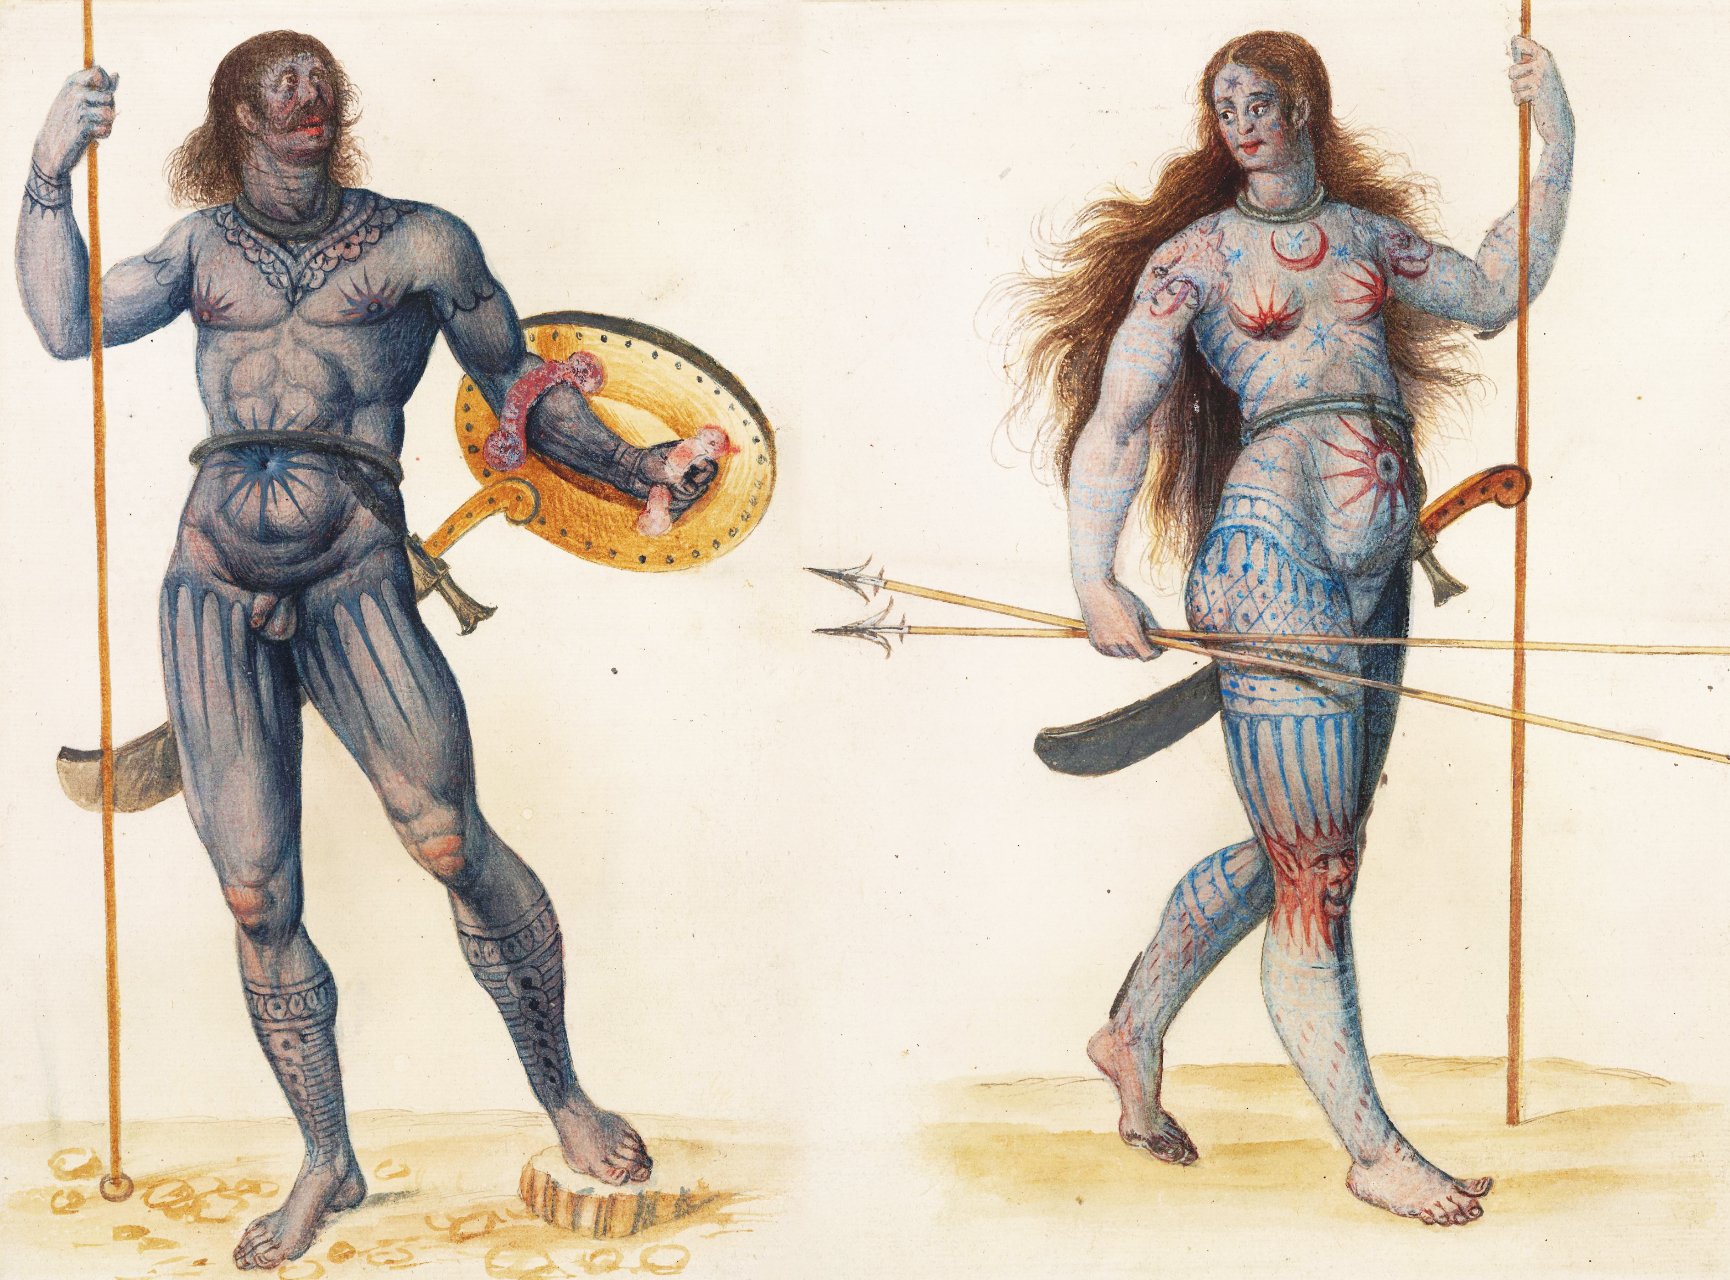 An illustration of two Picti warriors, male on the left, female on the right. They are both covered in blue body paint or tattoos, holding different weapons and standing on a beige background. The male figure on the left has a shield and a sword, while the female figure on the right has spears and a sword.